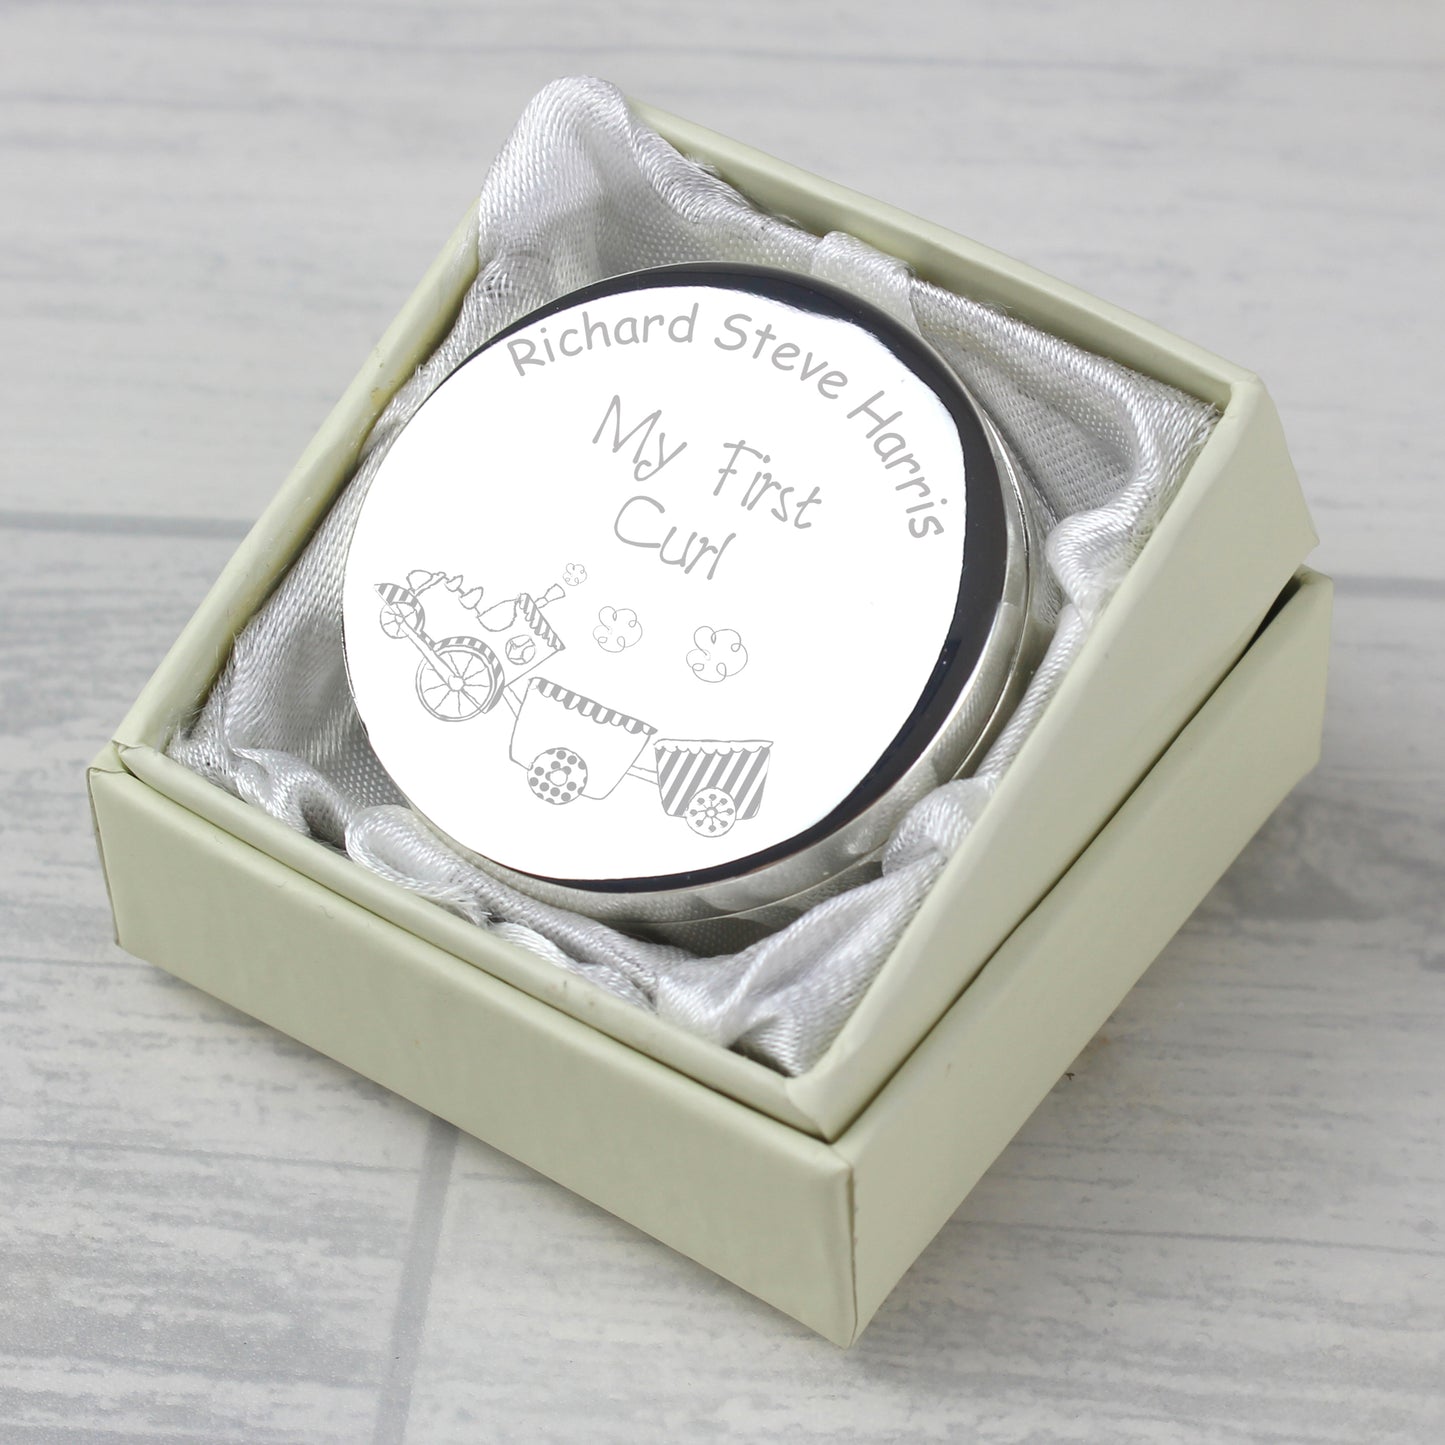 Personalised Train My First Curl Trinket Box - Personalise It!